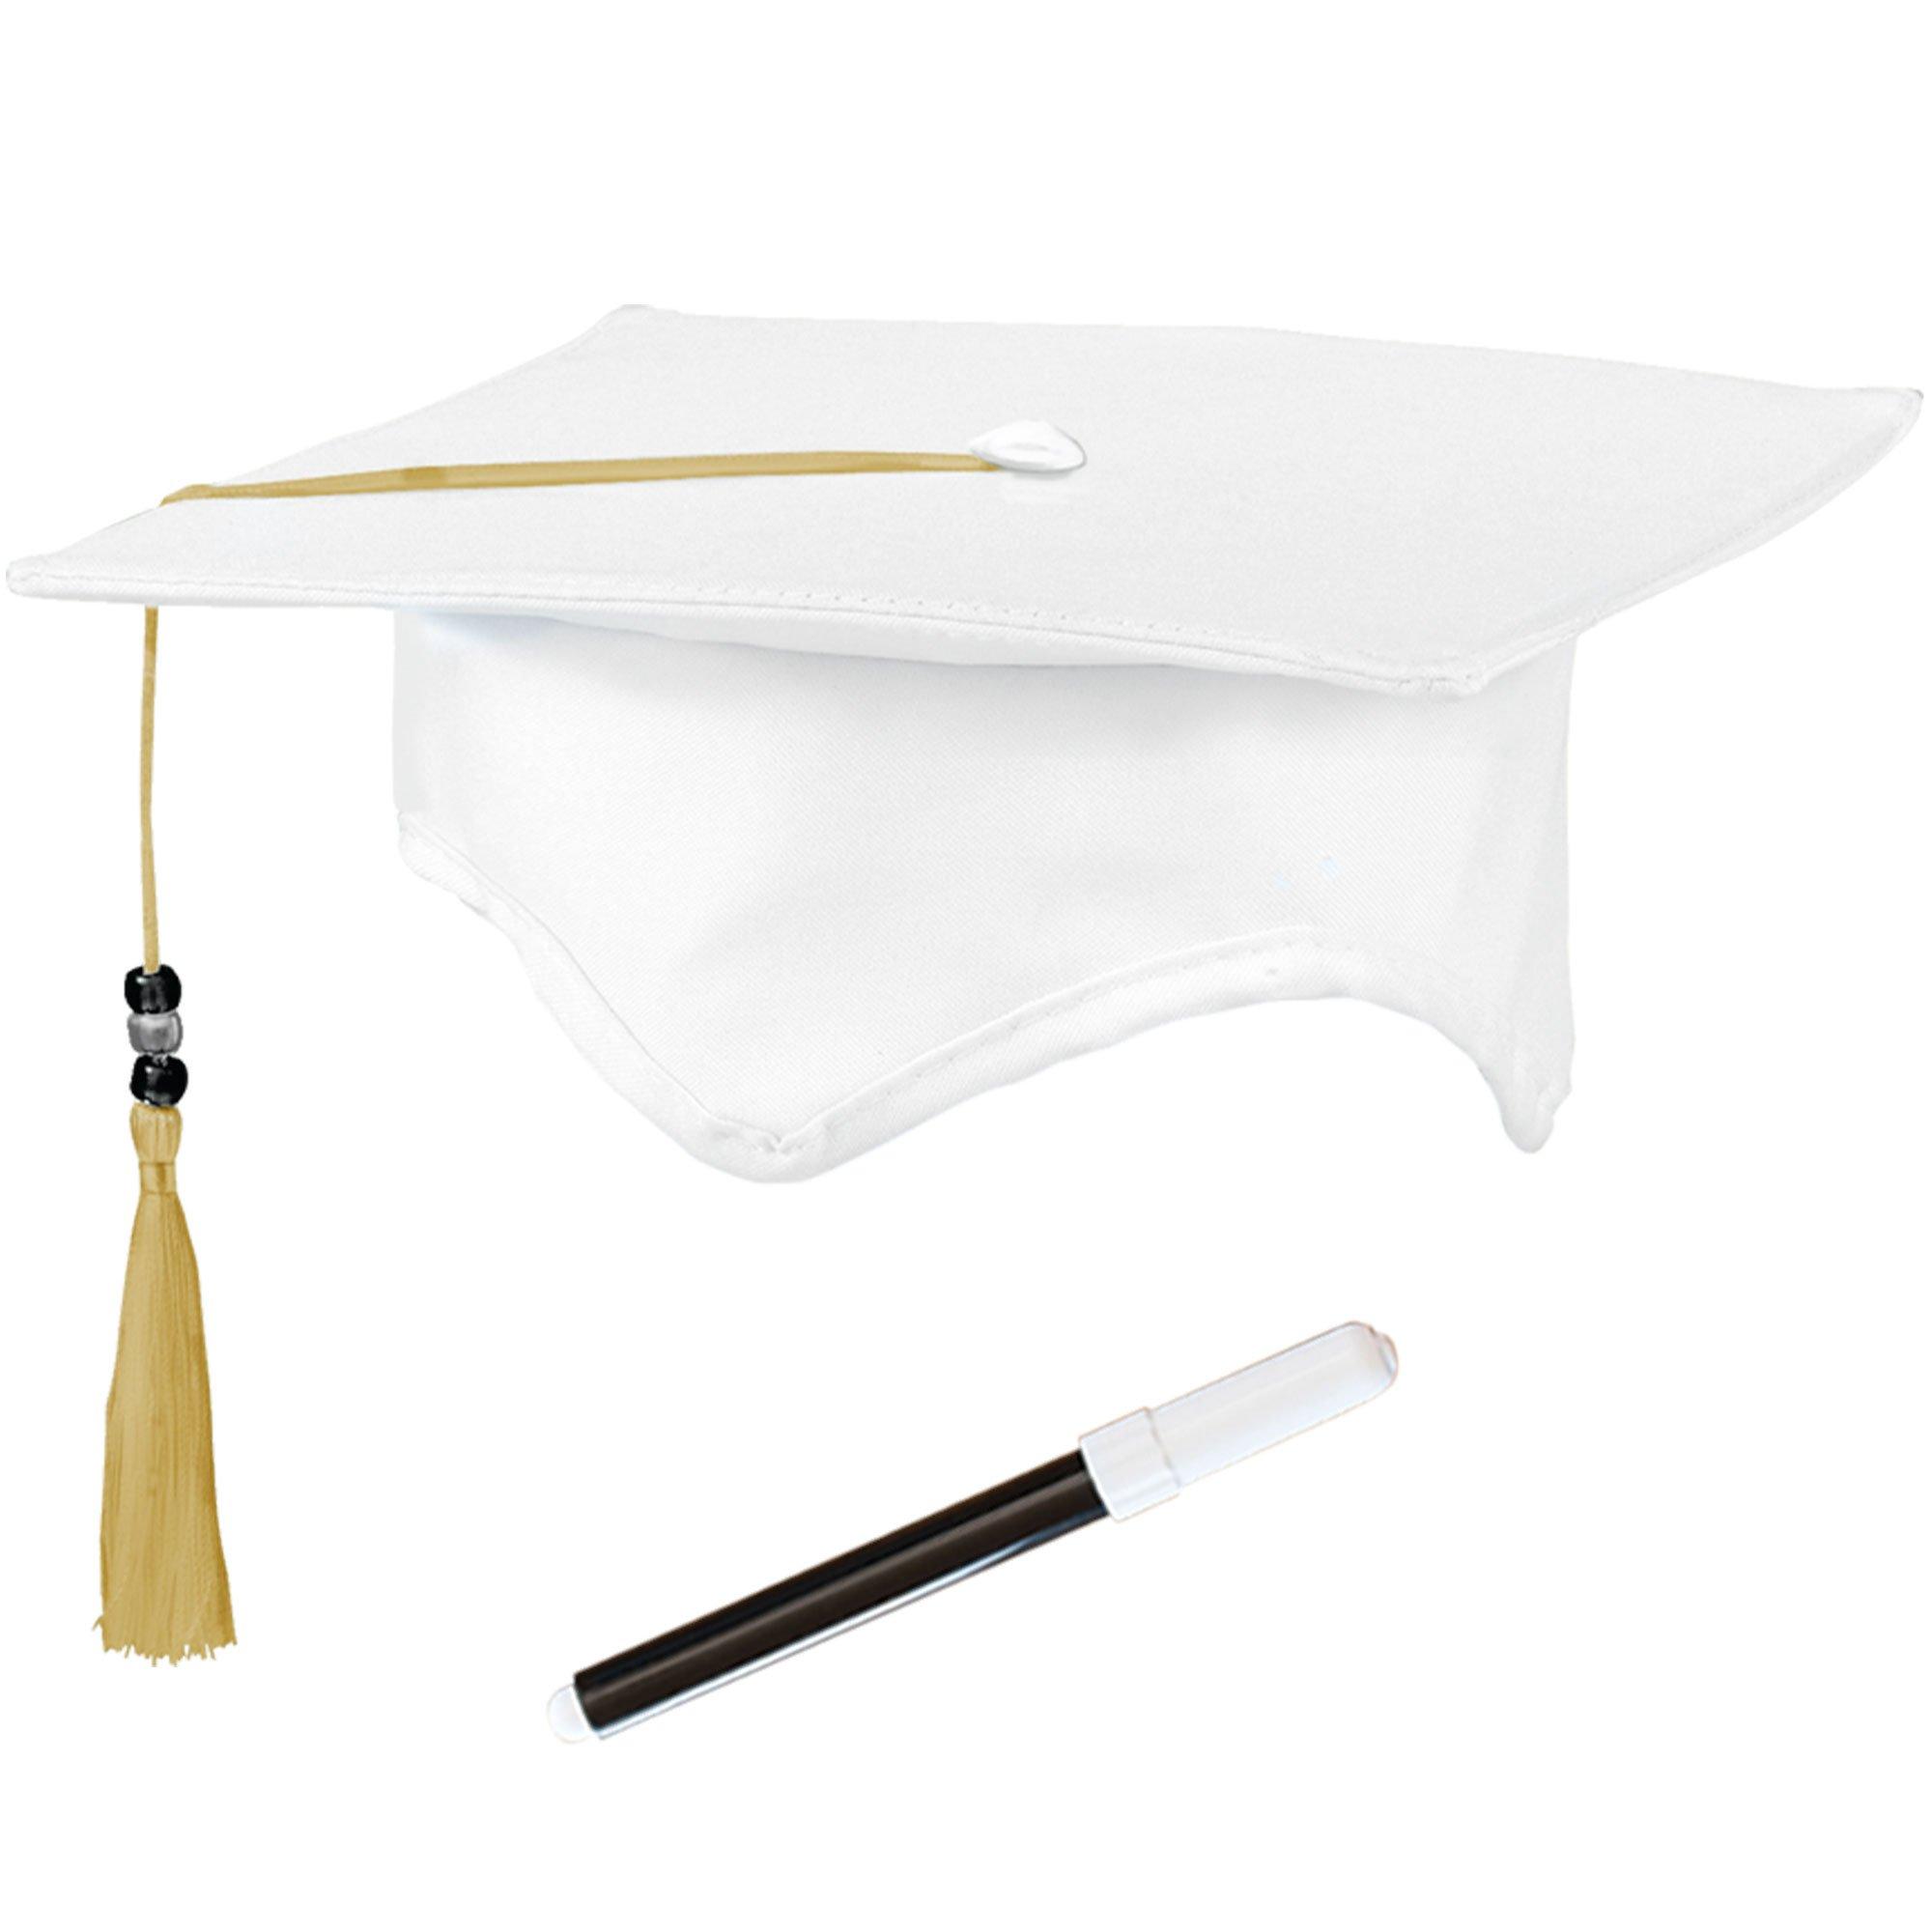 White Autograph Mortarboard Graduation Cap, 9in x 9in, with Marker